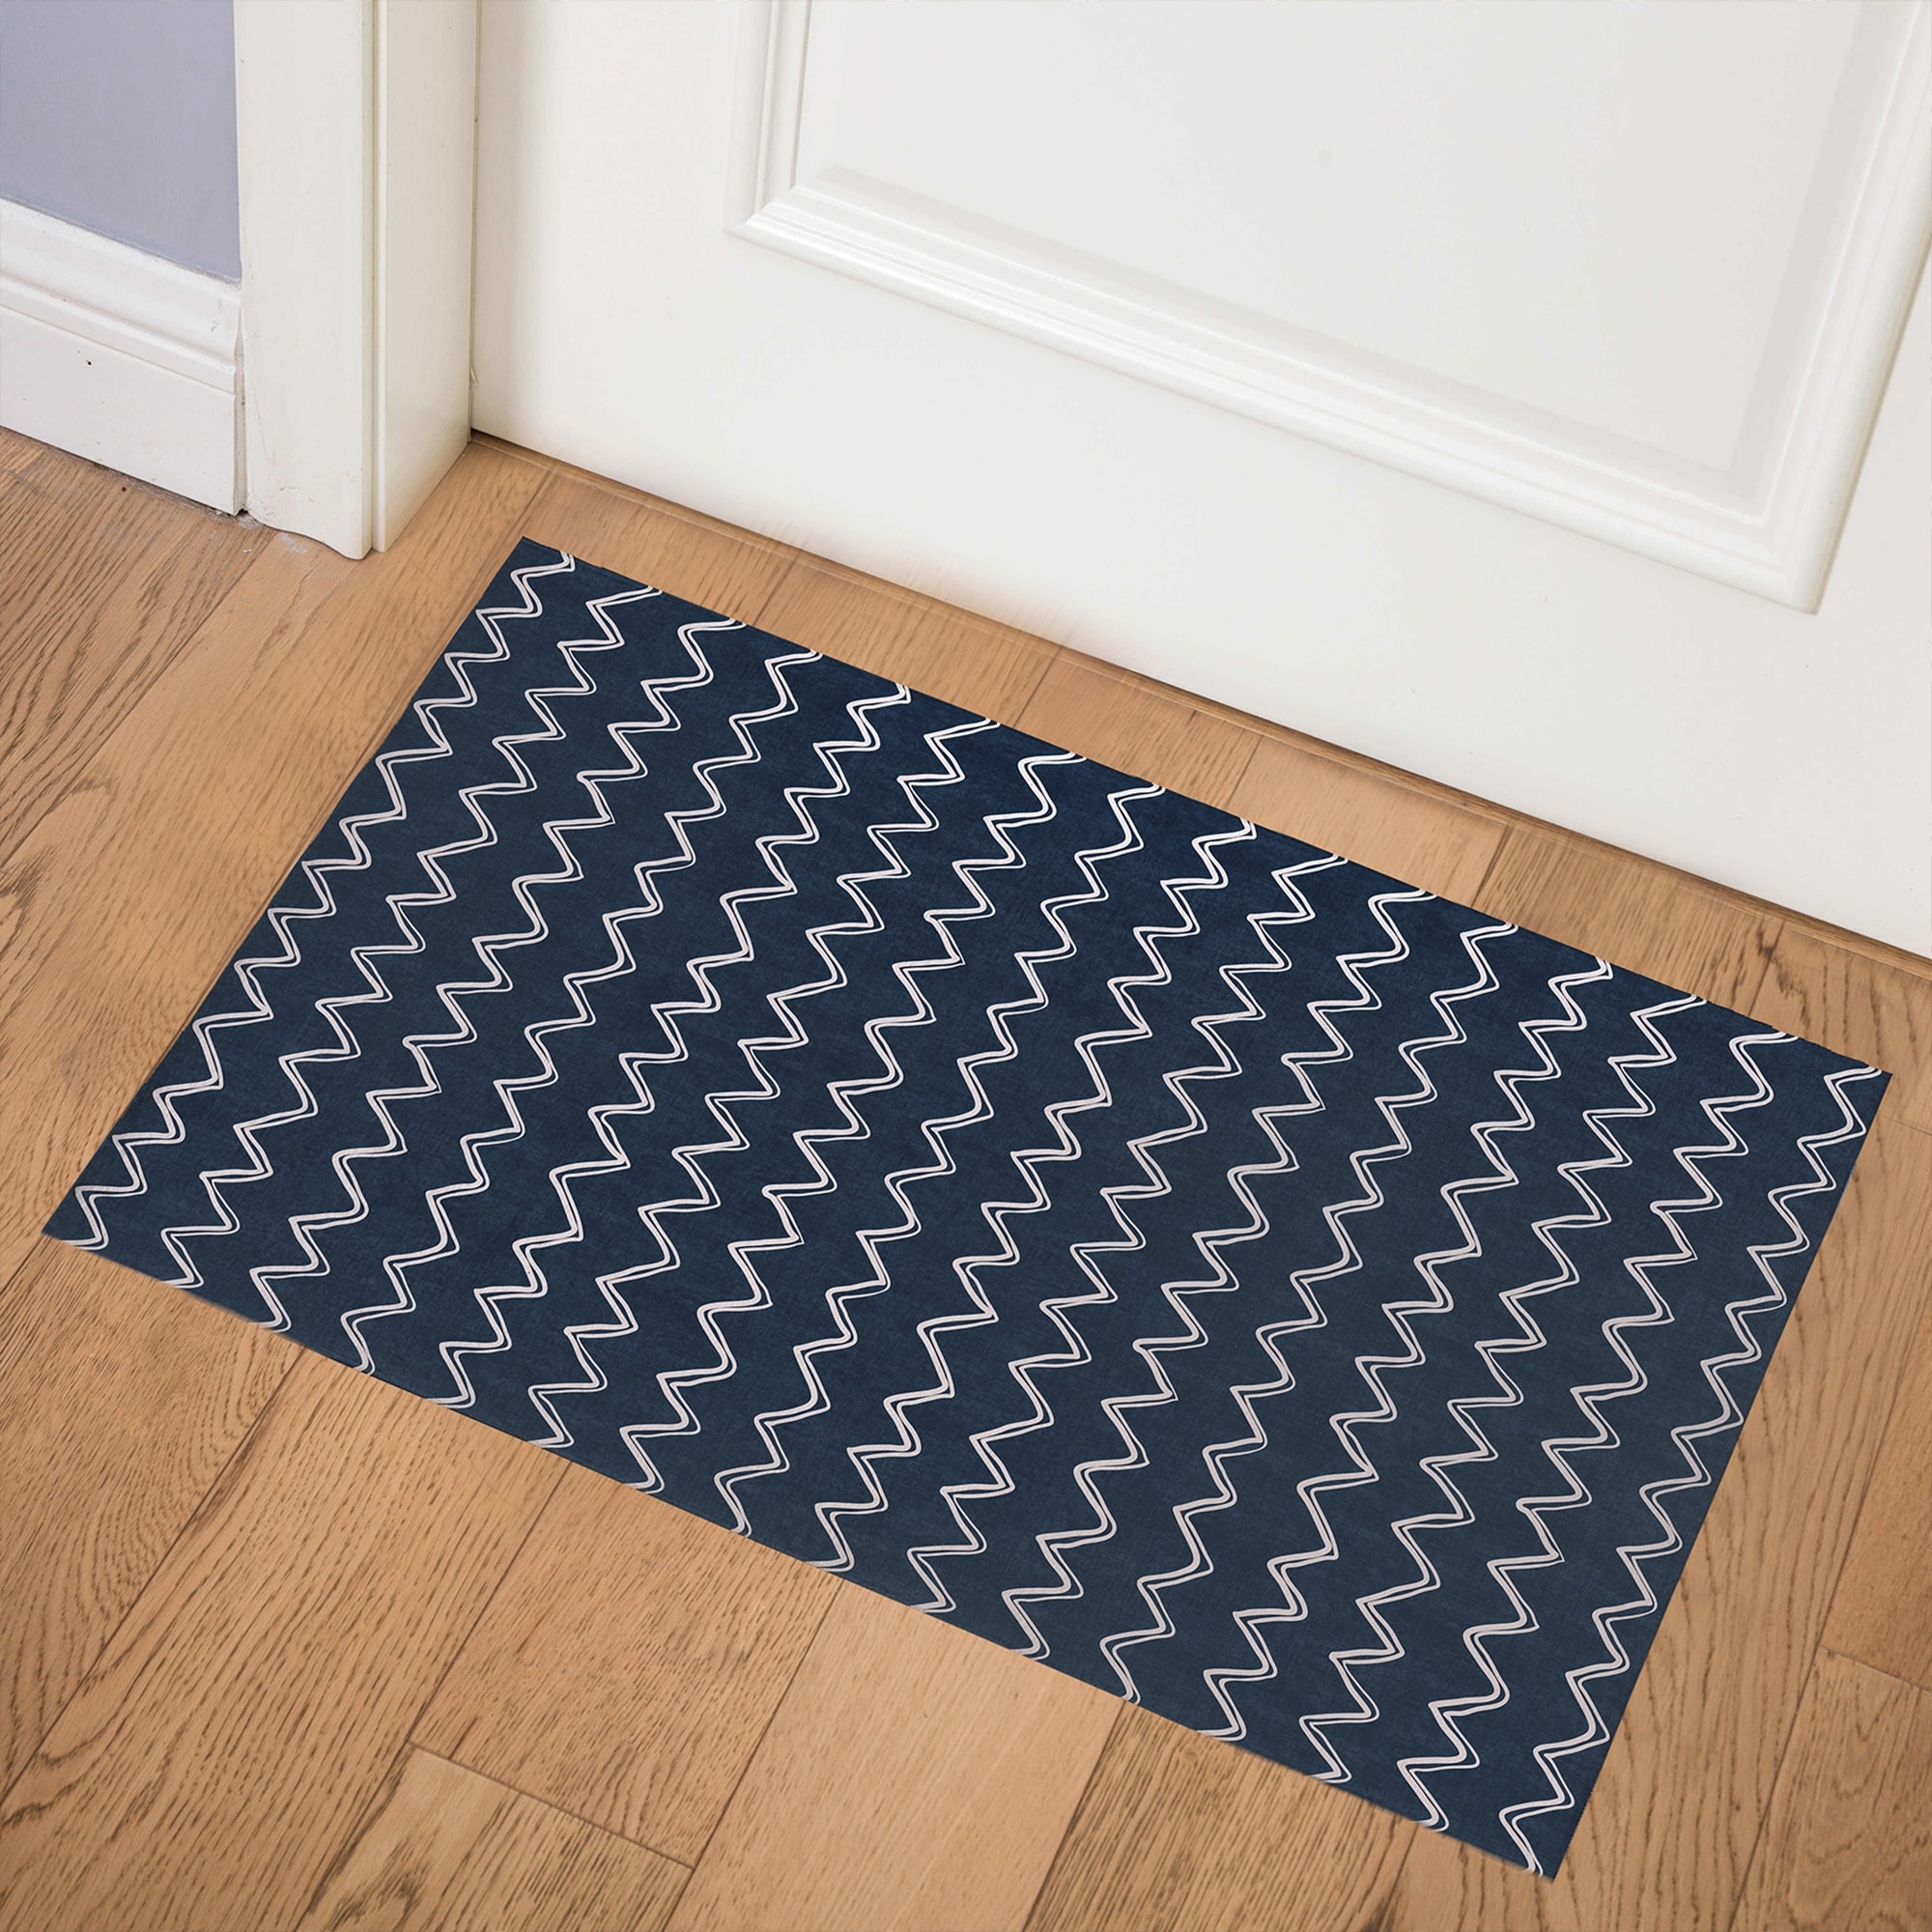 https://ak1.ostkcdn.com/images/products/is/images/direct/dc7ff69acff3695367efbeed8a3fe7d7fe767b79/MOROCCAN-HORIZONTAL-STRIPE-NAVY-Indoor-Floor-Mat-By-Becky-Bailey.jpg